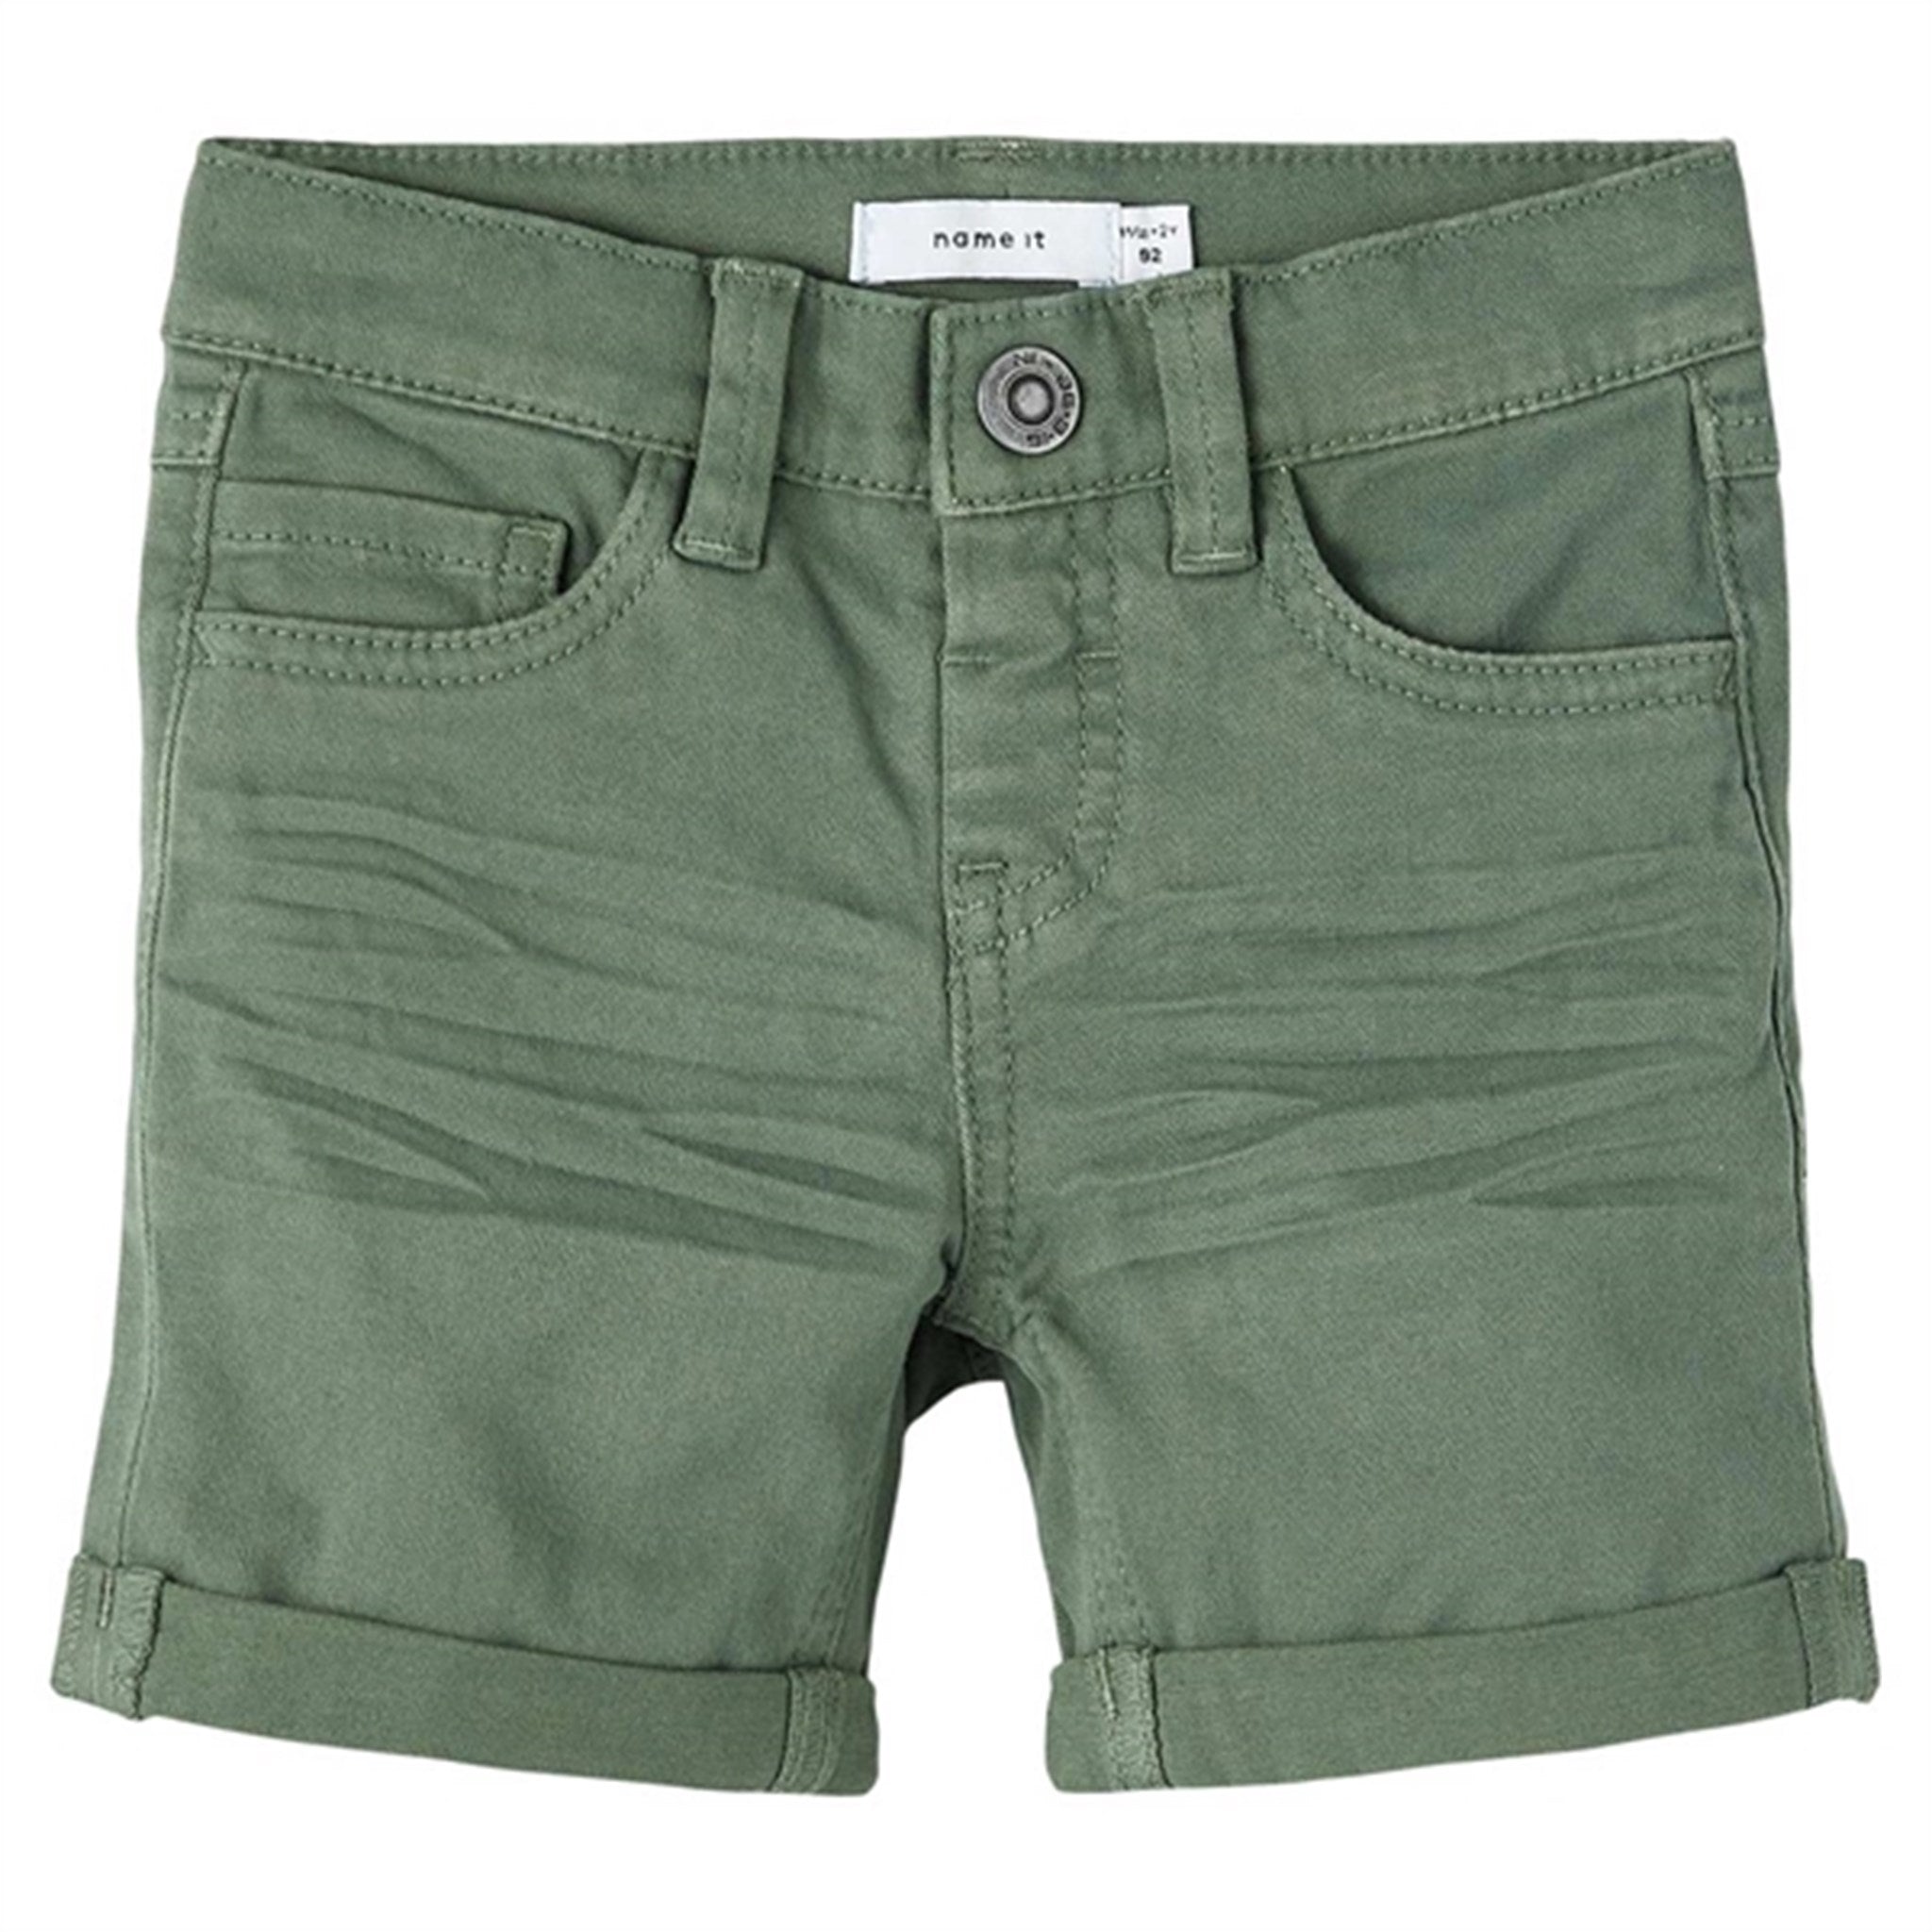 Name it Duck Green Sofus Twill Shorts